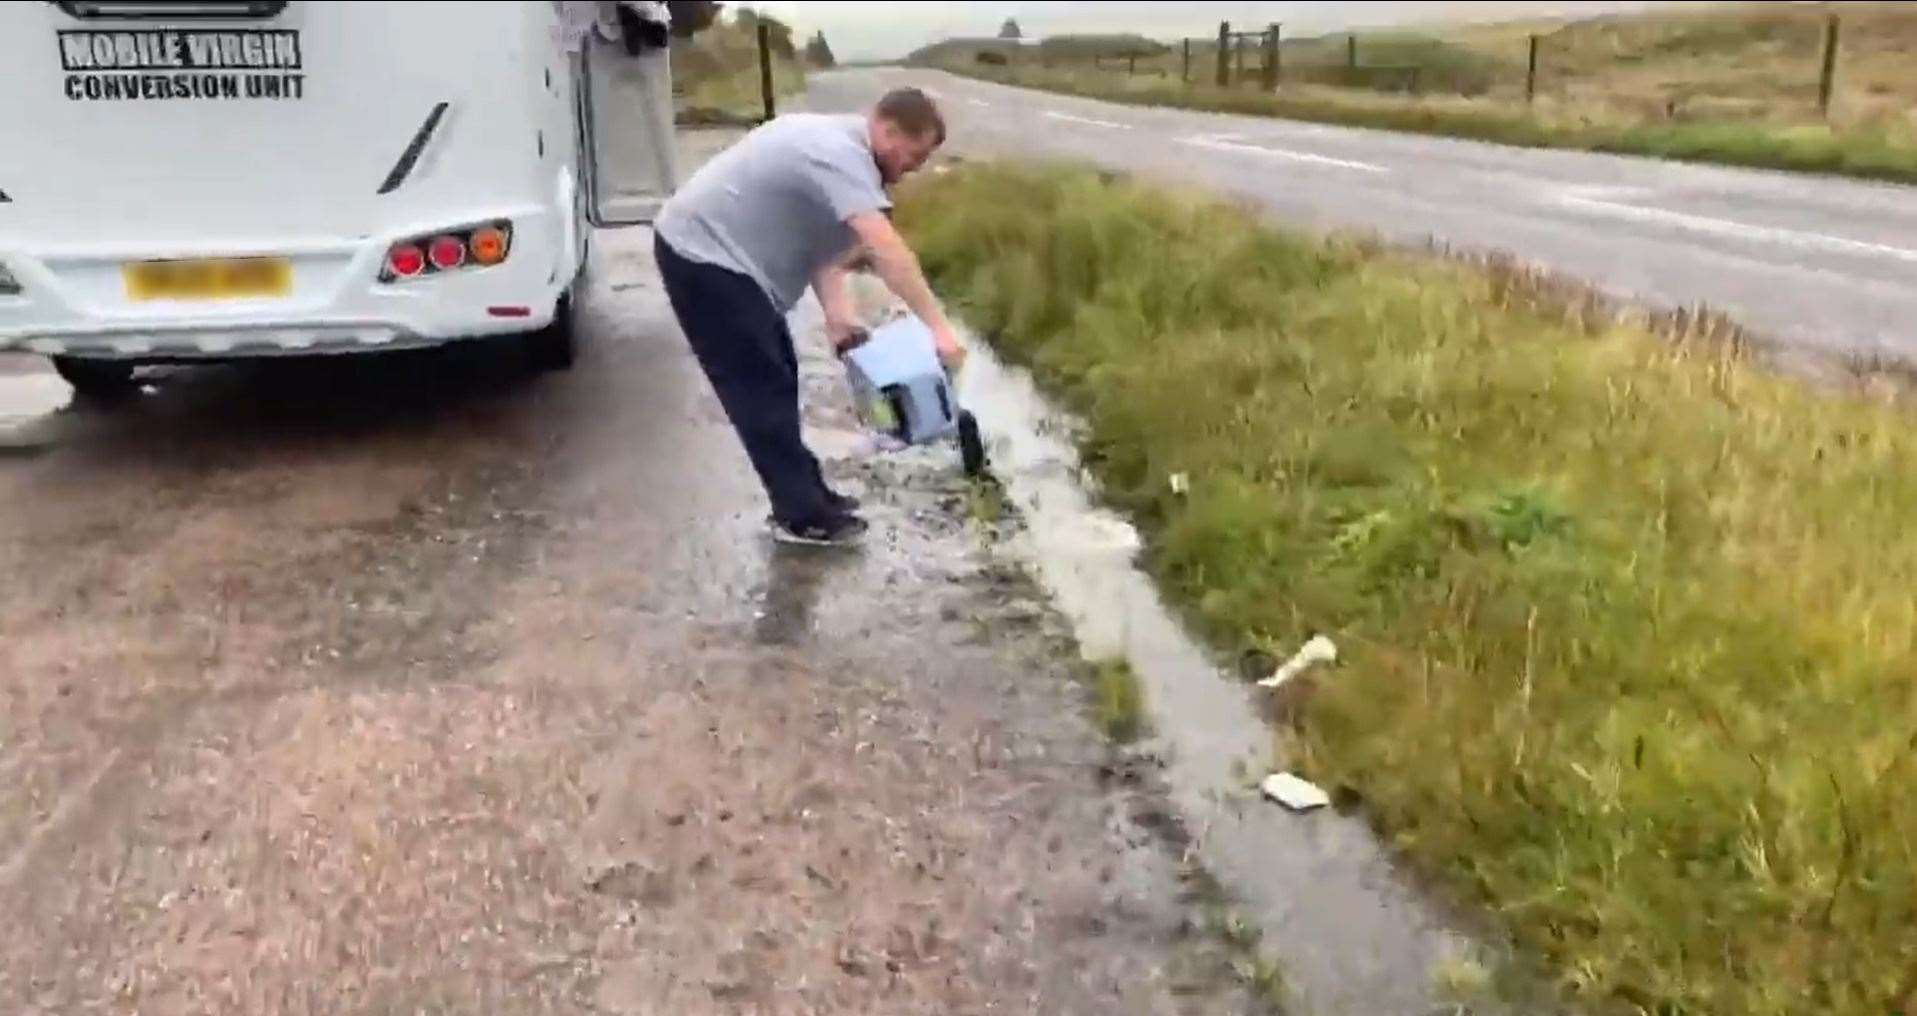 A still from a video showing a man emptying his campervan's toilet into a layby.